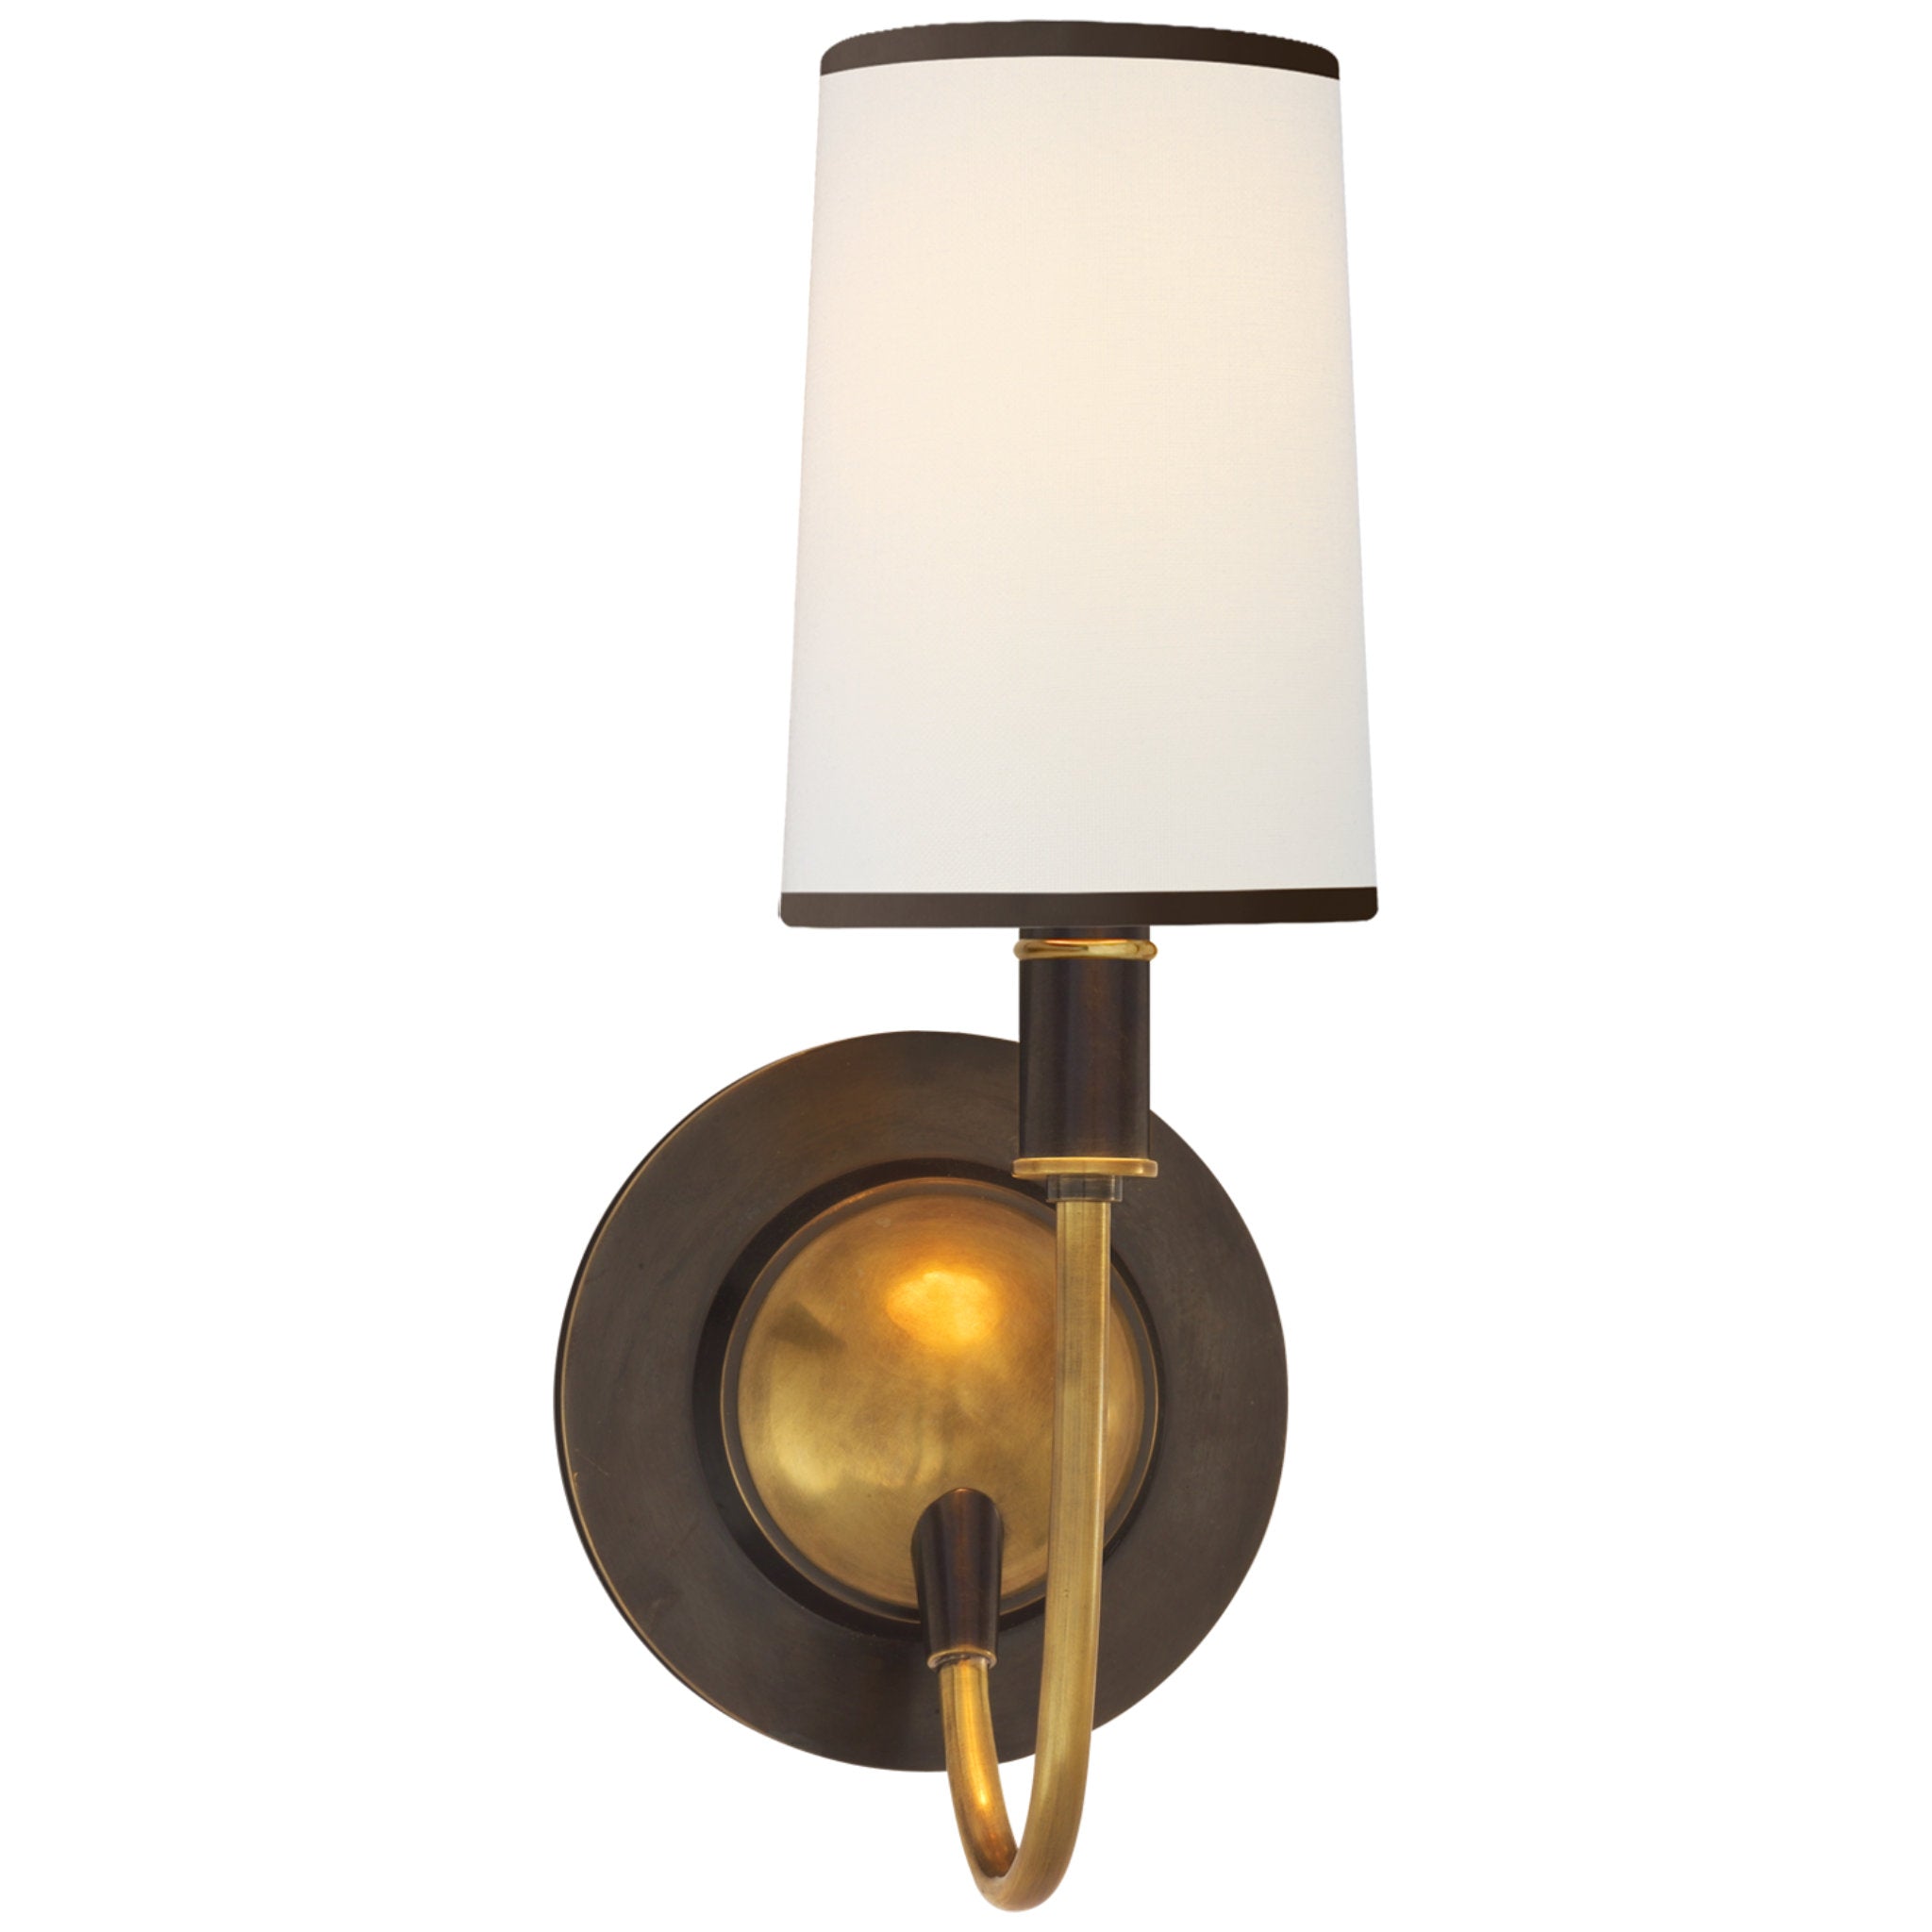 Thomas O'Brien Elkins Sconce in Bronze and Hand-Rubbed Antique Brass with Linen Shade with Black Trim